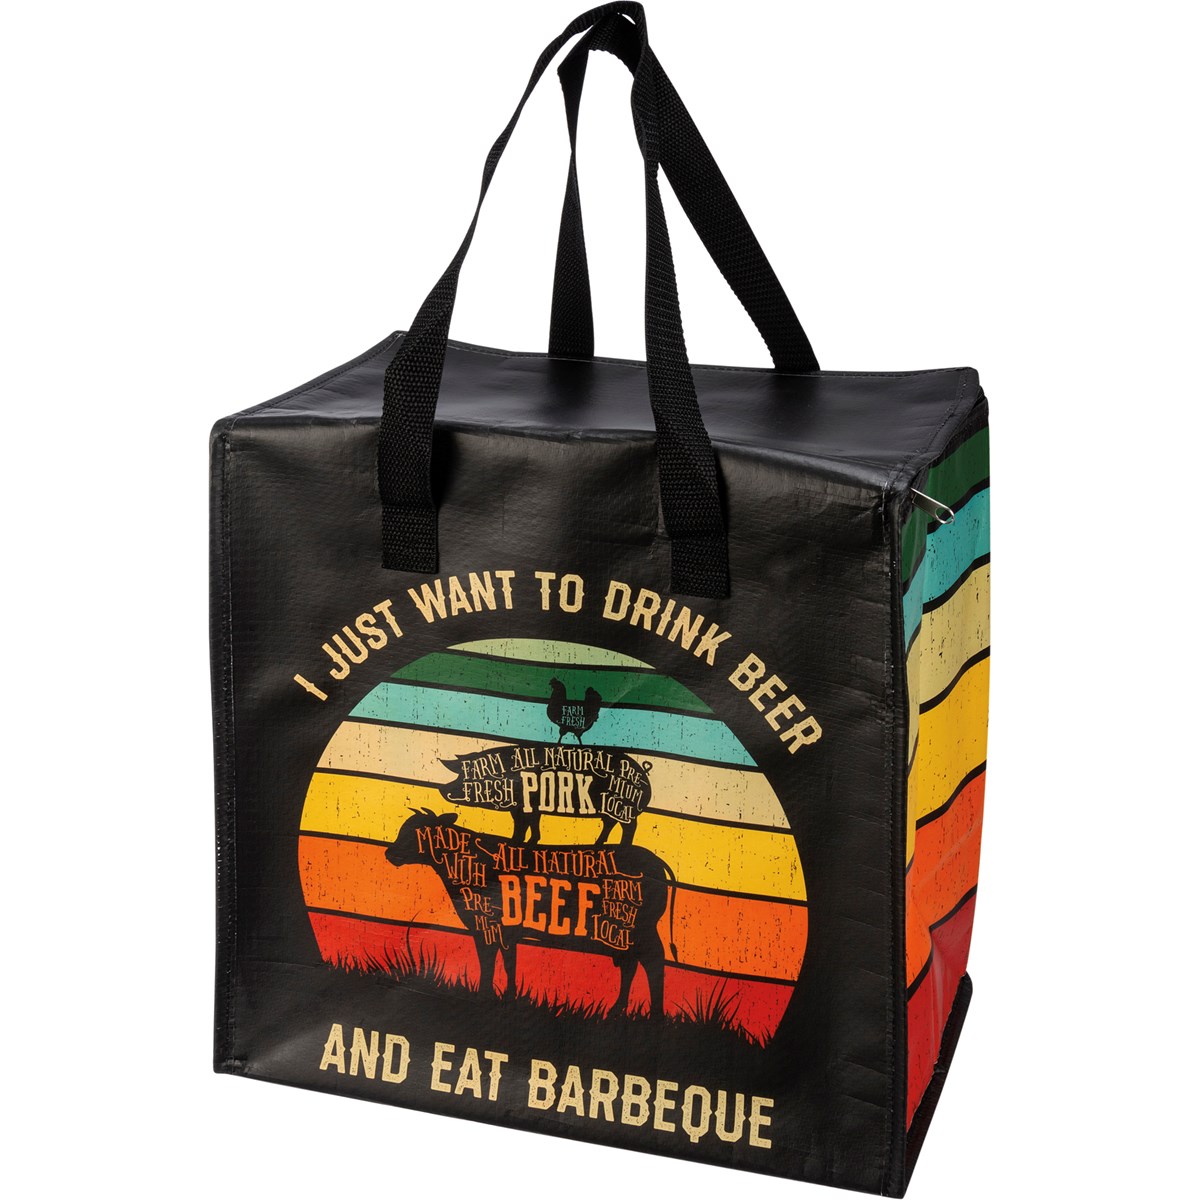 Insulated Tote - Eat Barbeque - 12.50" x 13" x 8" - Post-Consumer Material, Nylon, Zipper